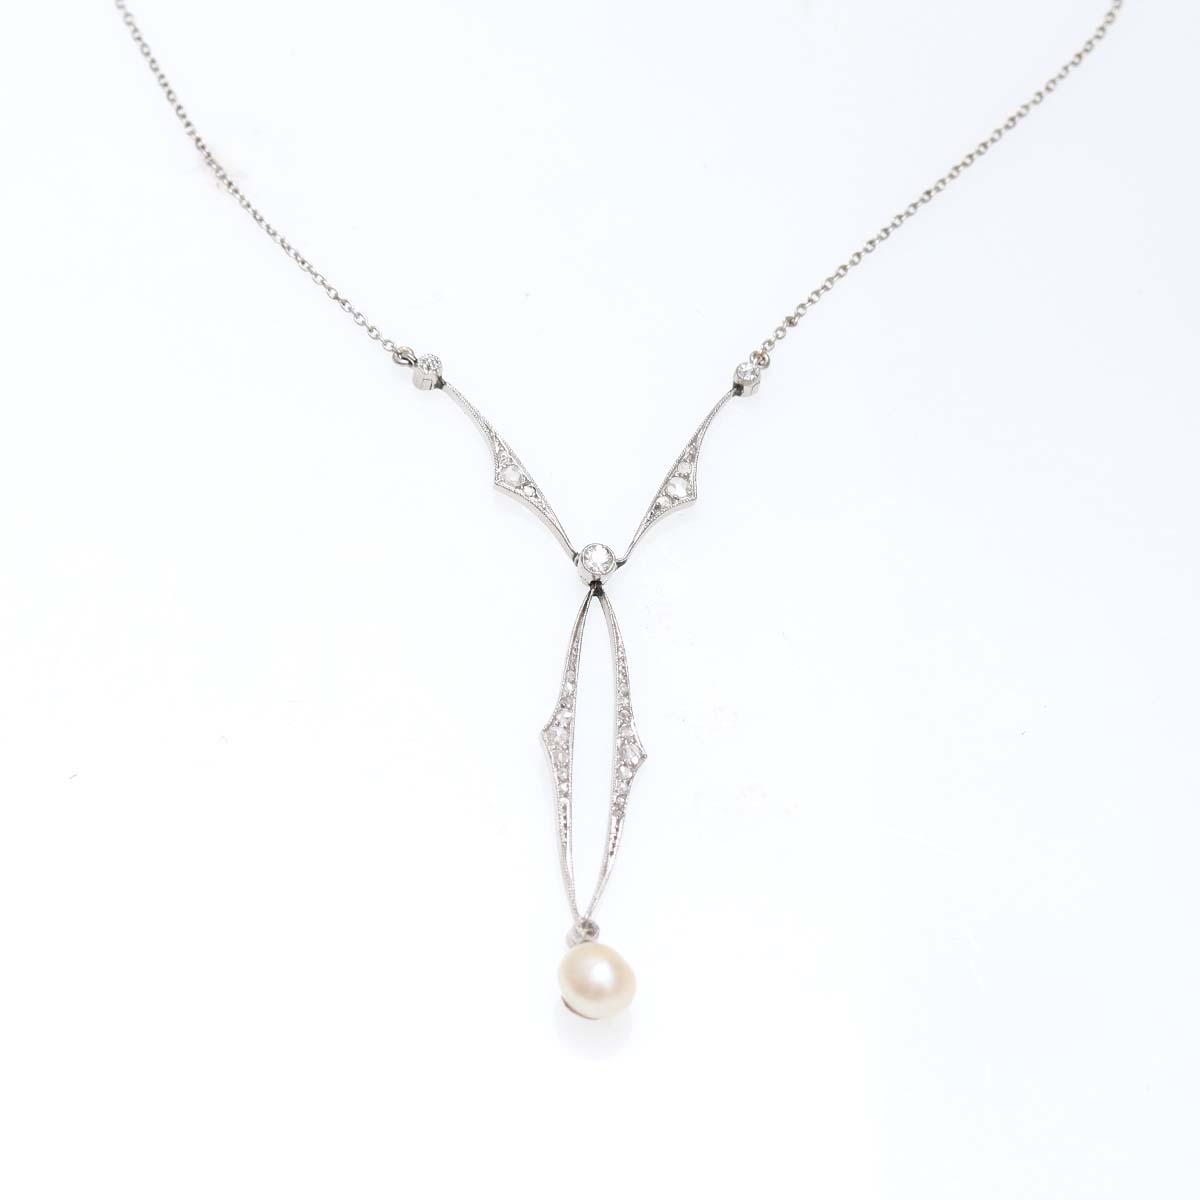 Edwardian Diamond and Pearl Necklace #VN230826